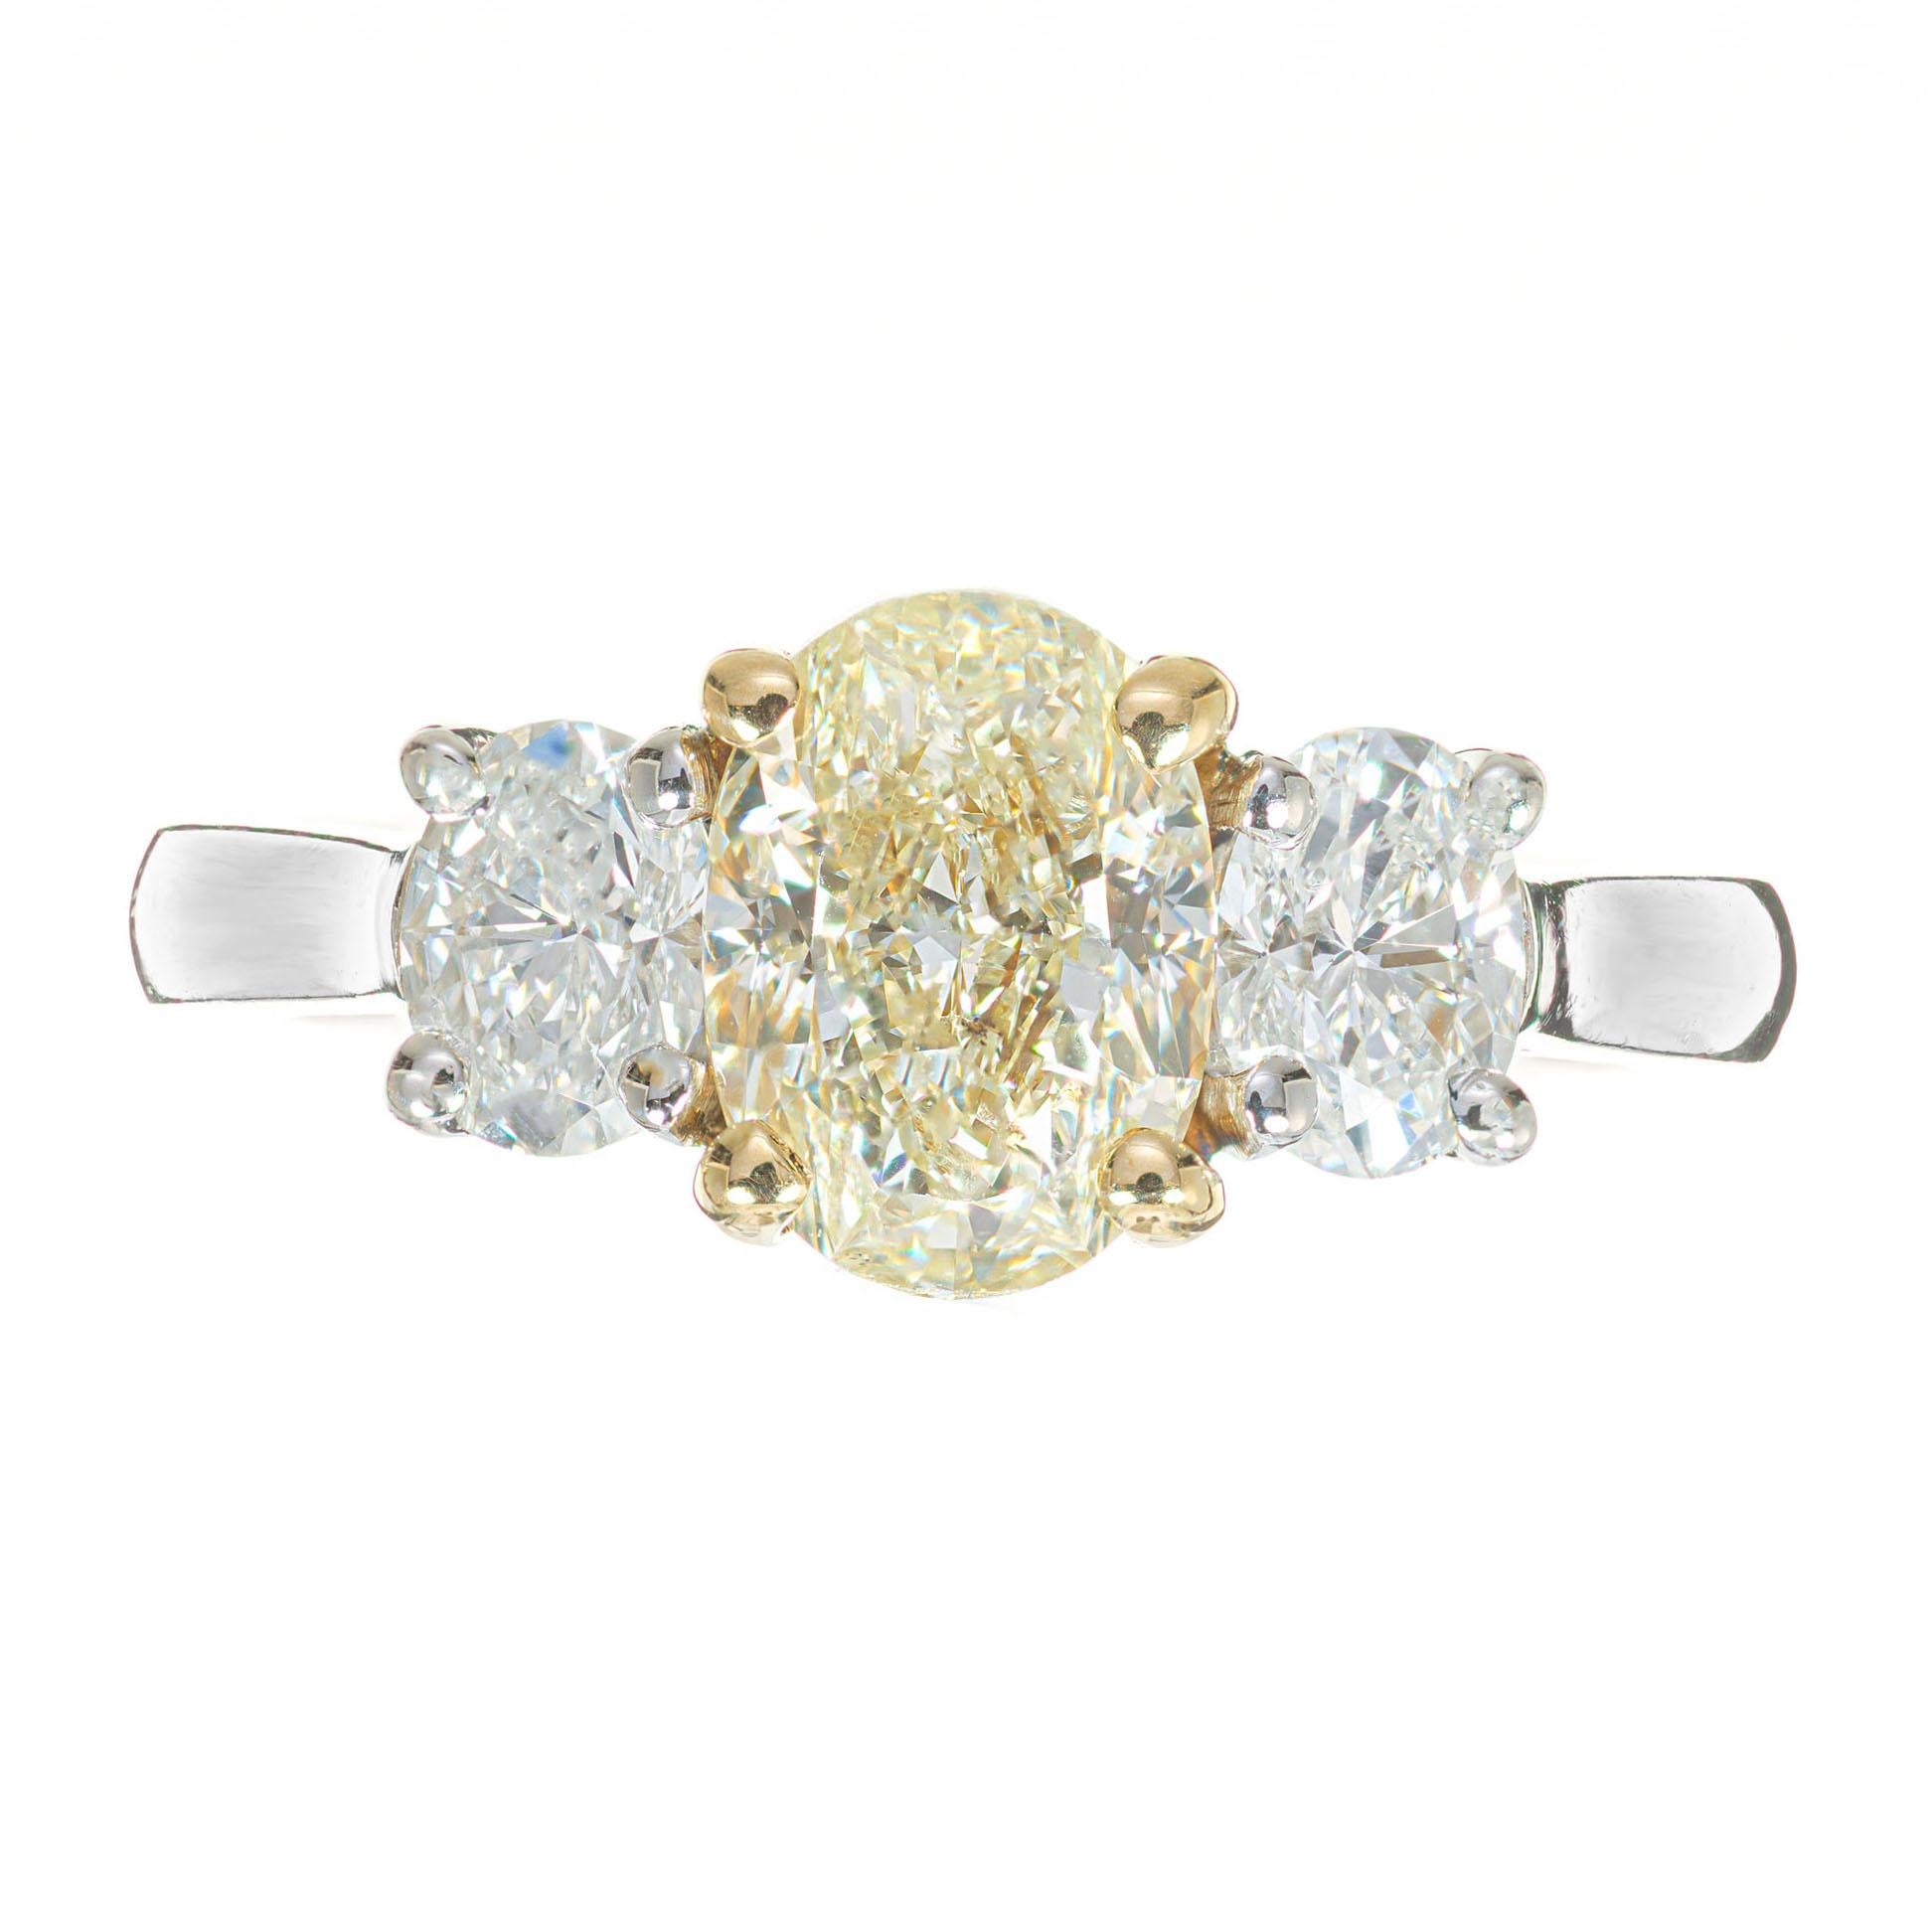 Three-stone oval yellow diamond 18k white gold engagement ring. This handmade setting from the Peter Suchy Workshop is set with a EGL certified fancy light yellow oval center diamond, accented with 2 oval white diamonds, in a three-stone 18k white